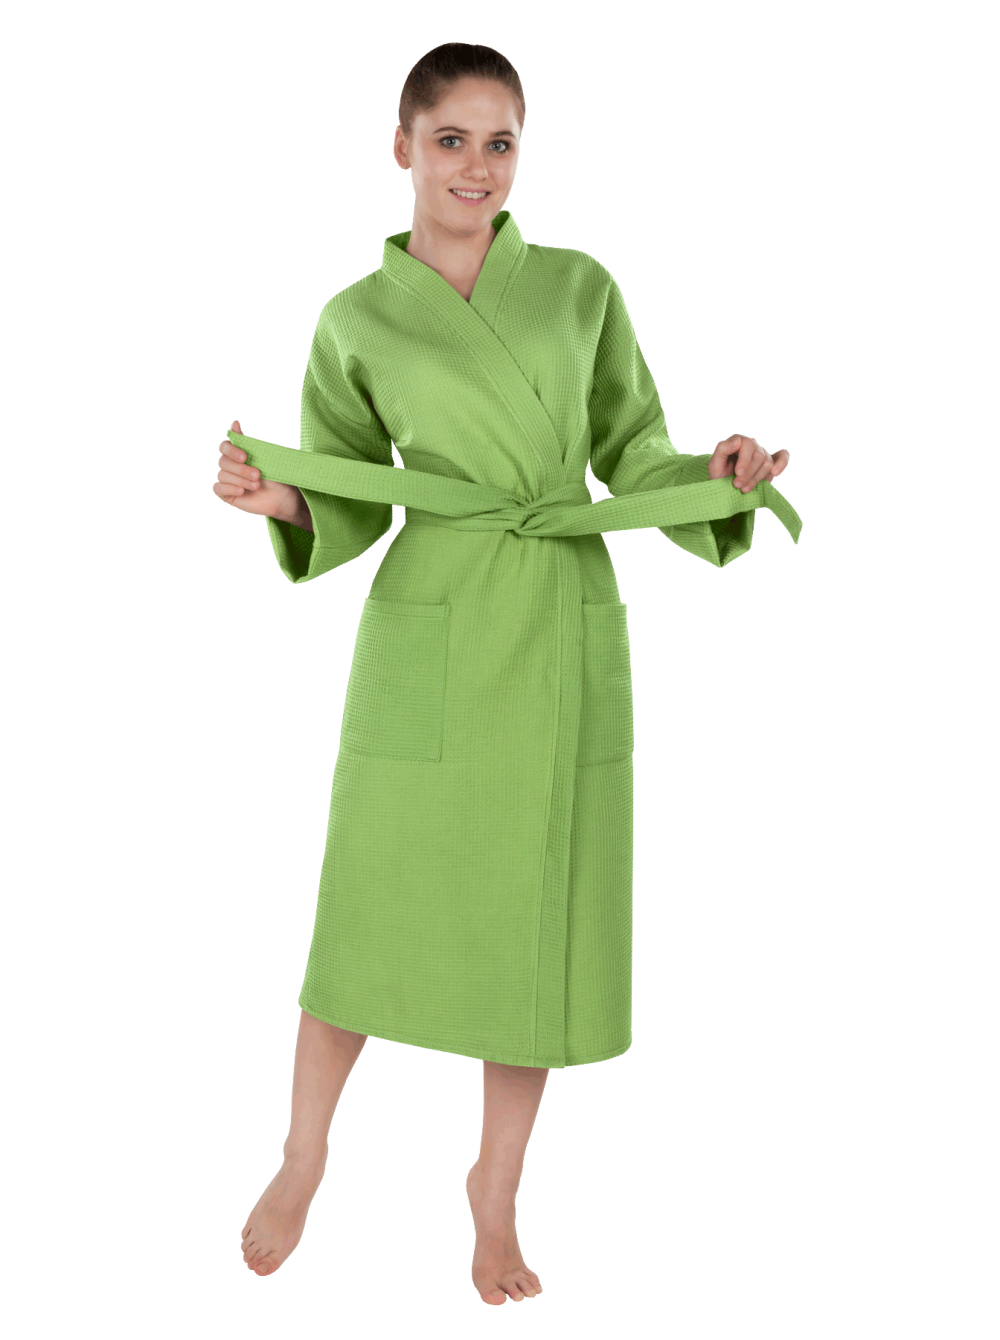 Bathrobe PNG Clipart Background